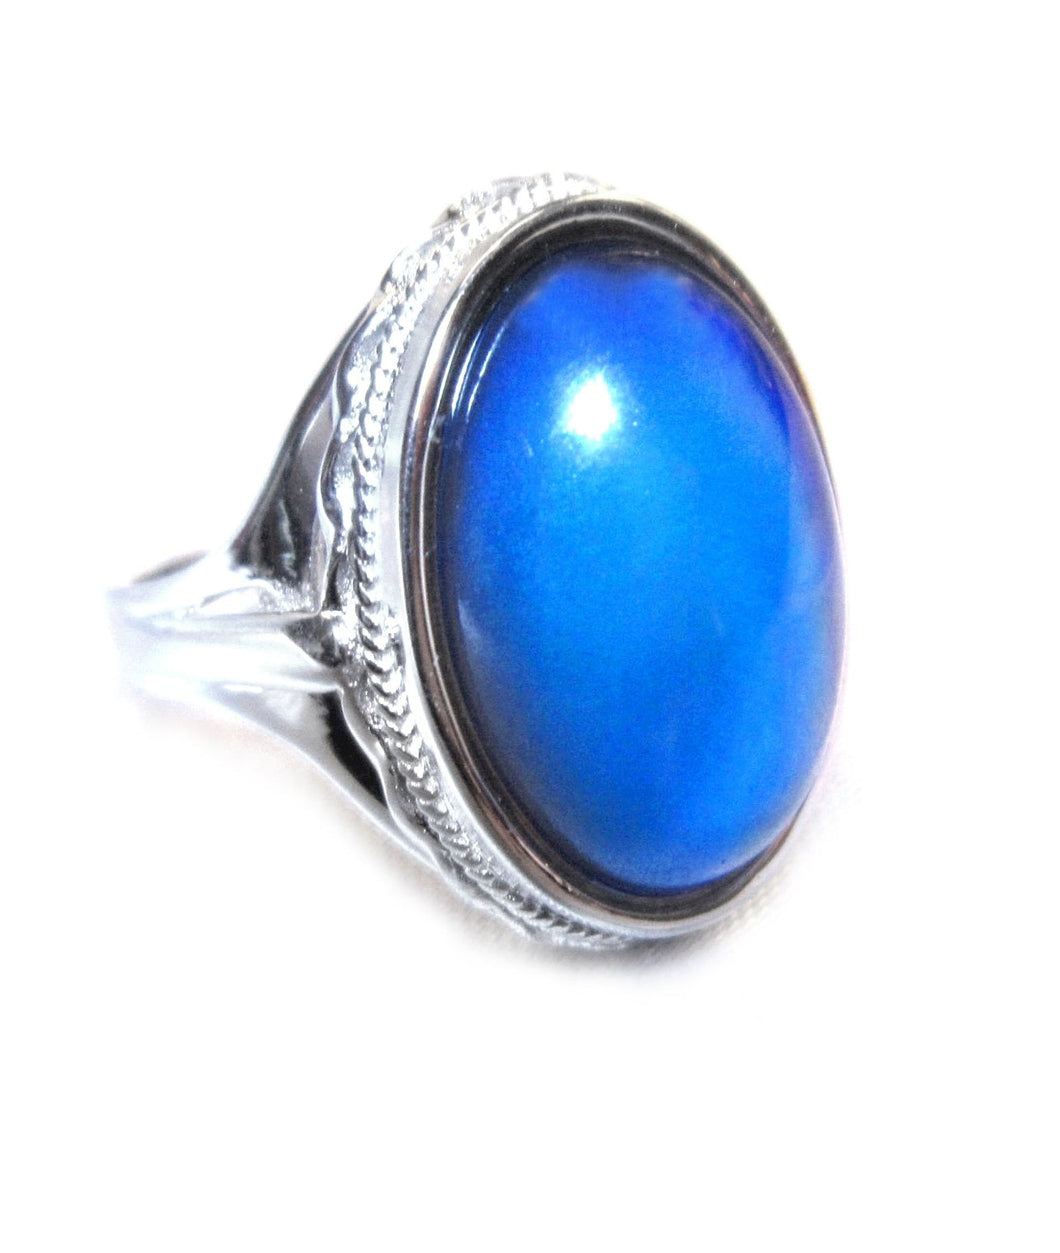 beautiful sterling silver mood ring full hallmark with blue mood meaning